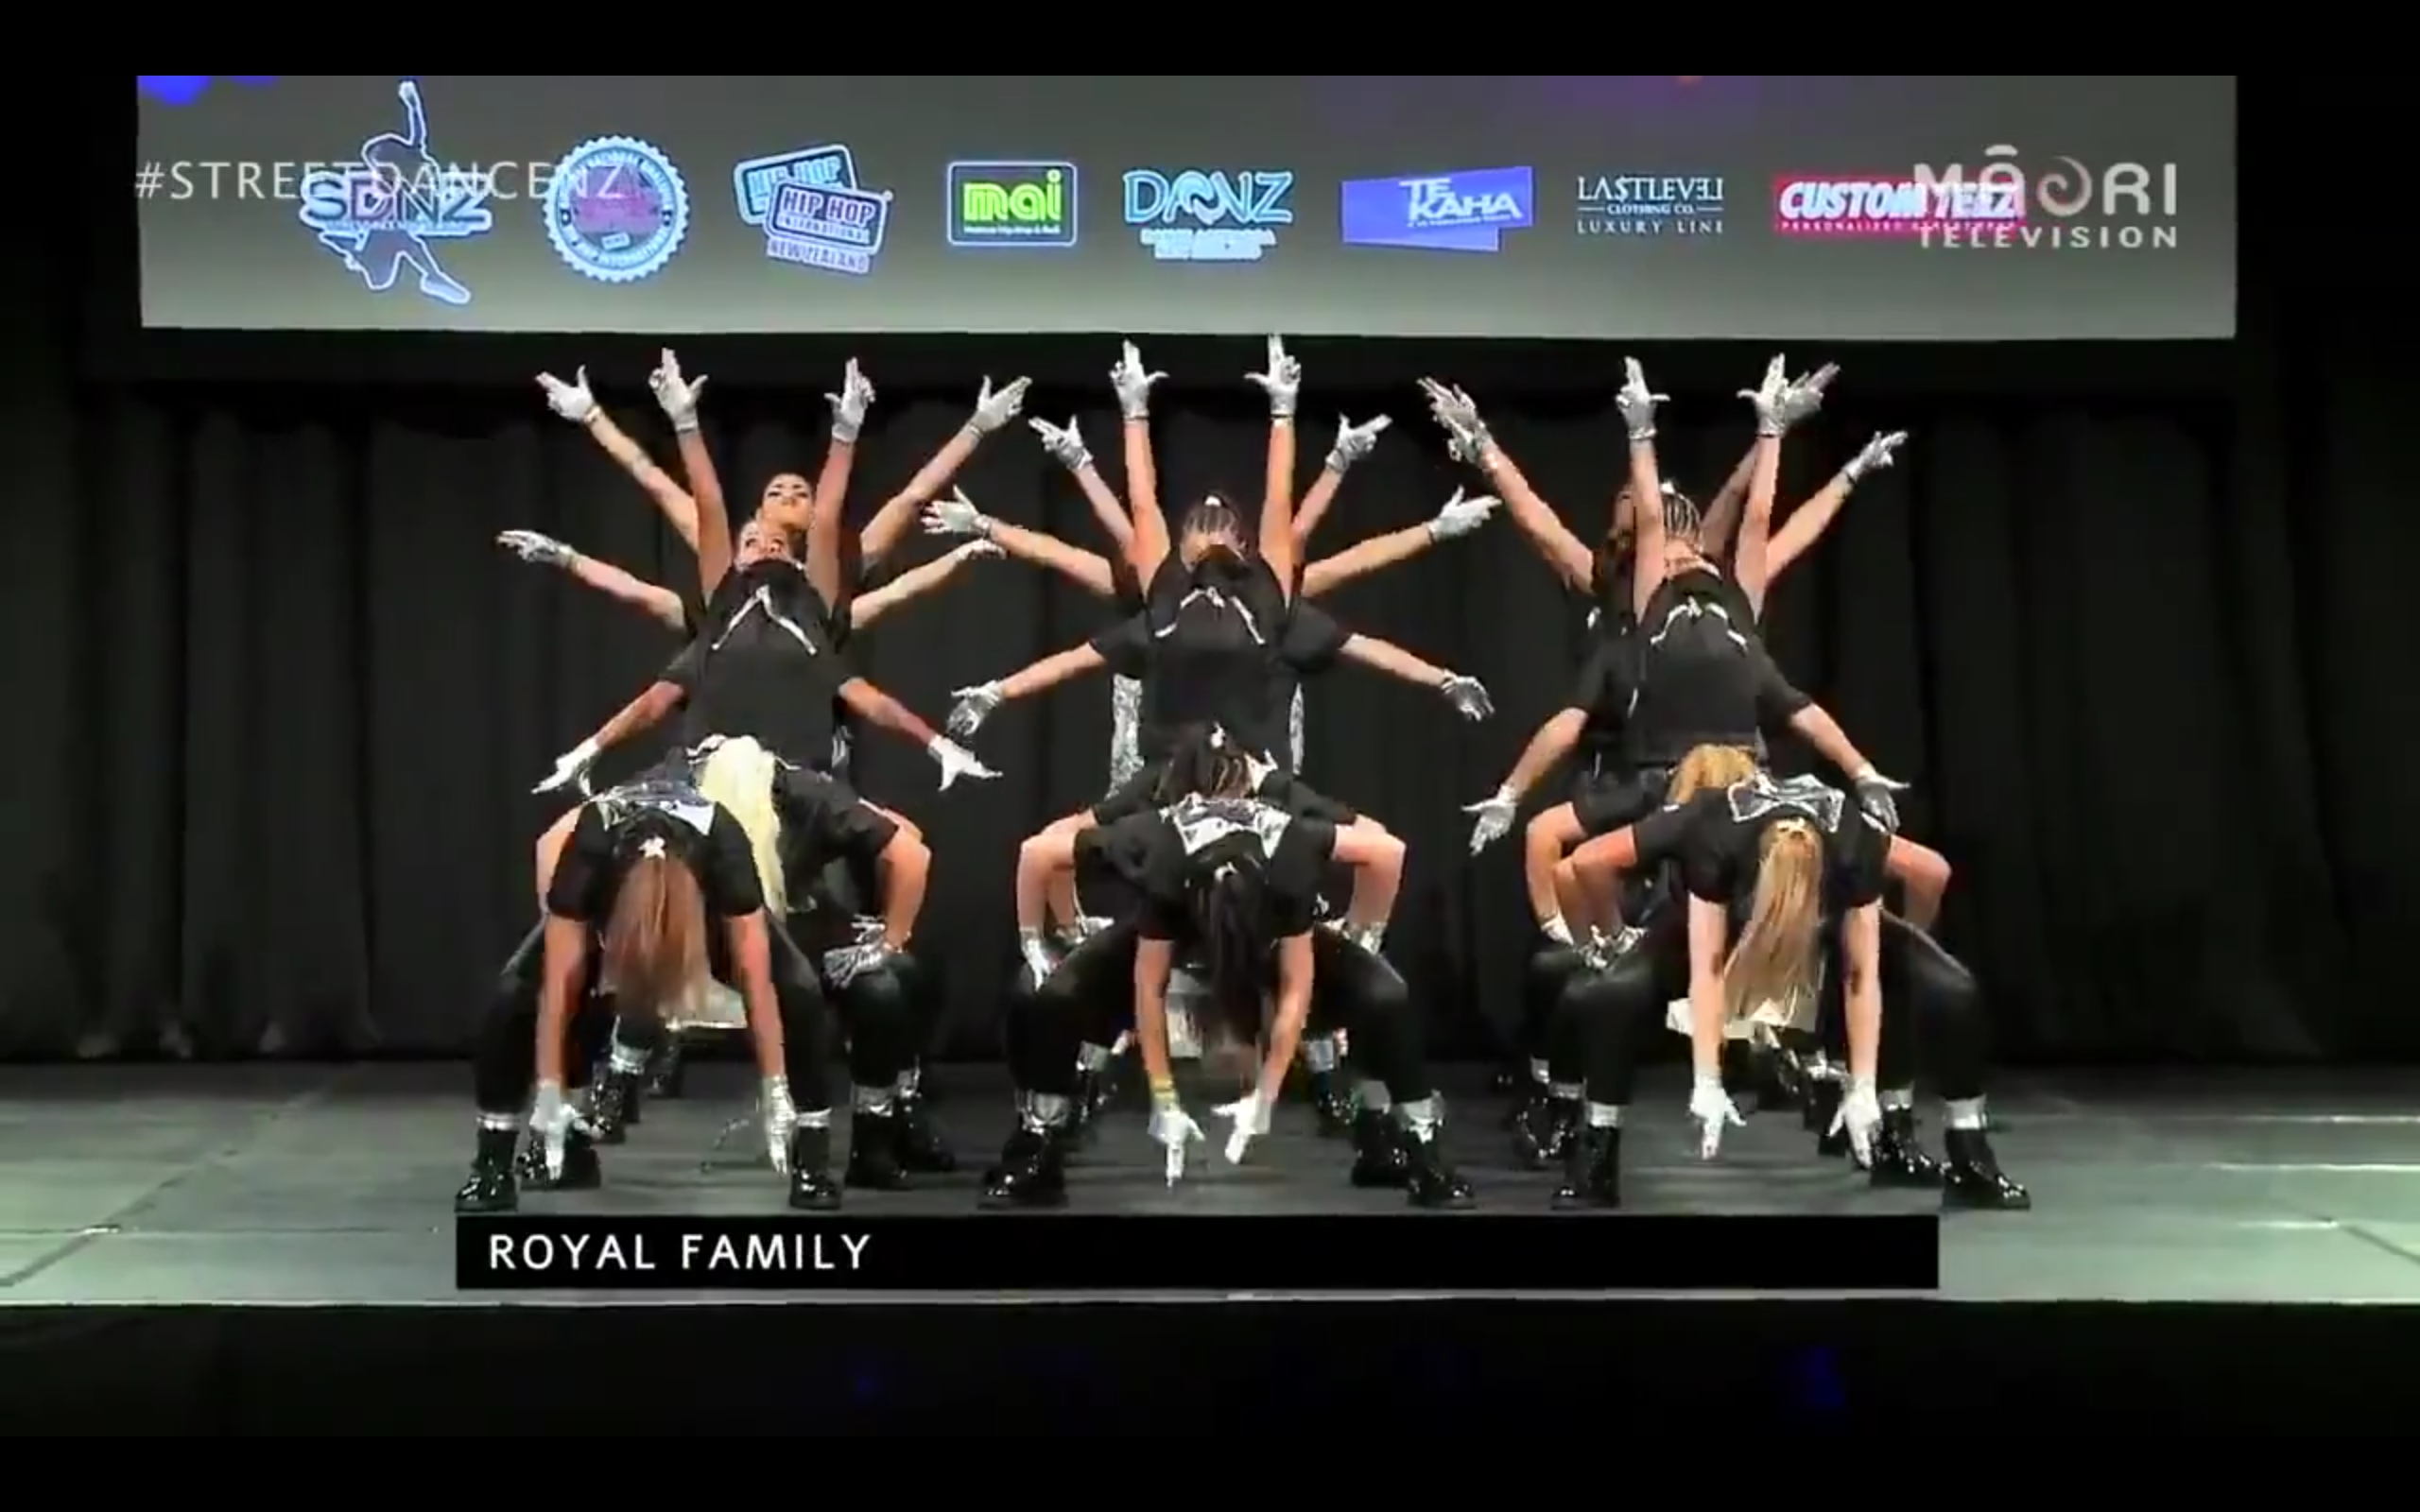 Watch The Royal Family Dance Crew — GAY.CH · Alles bleibt anders!